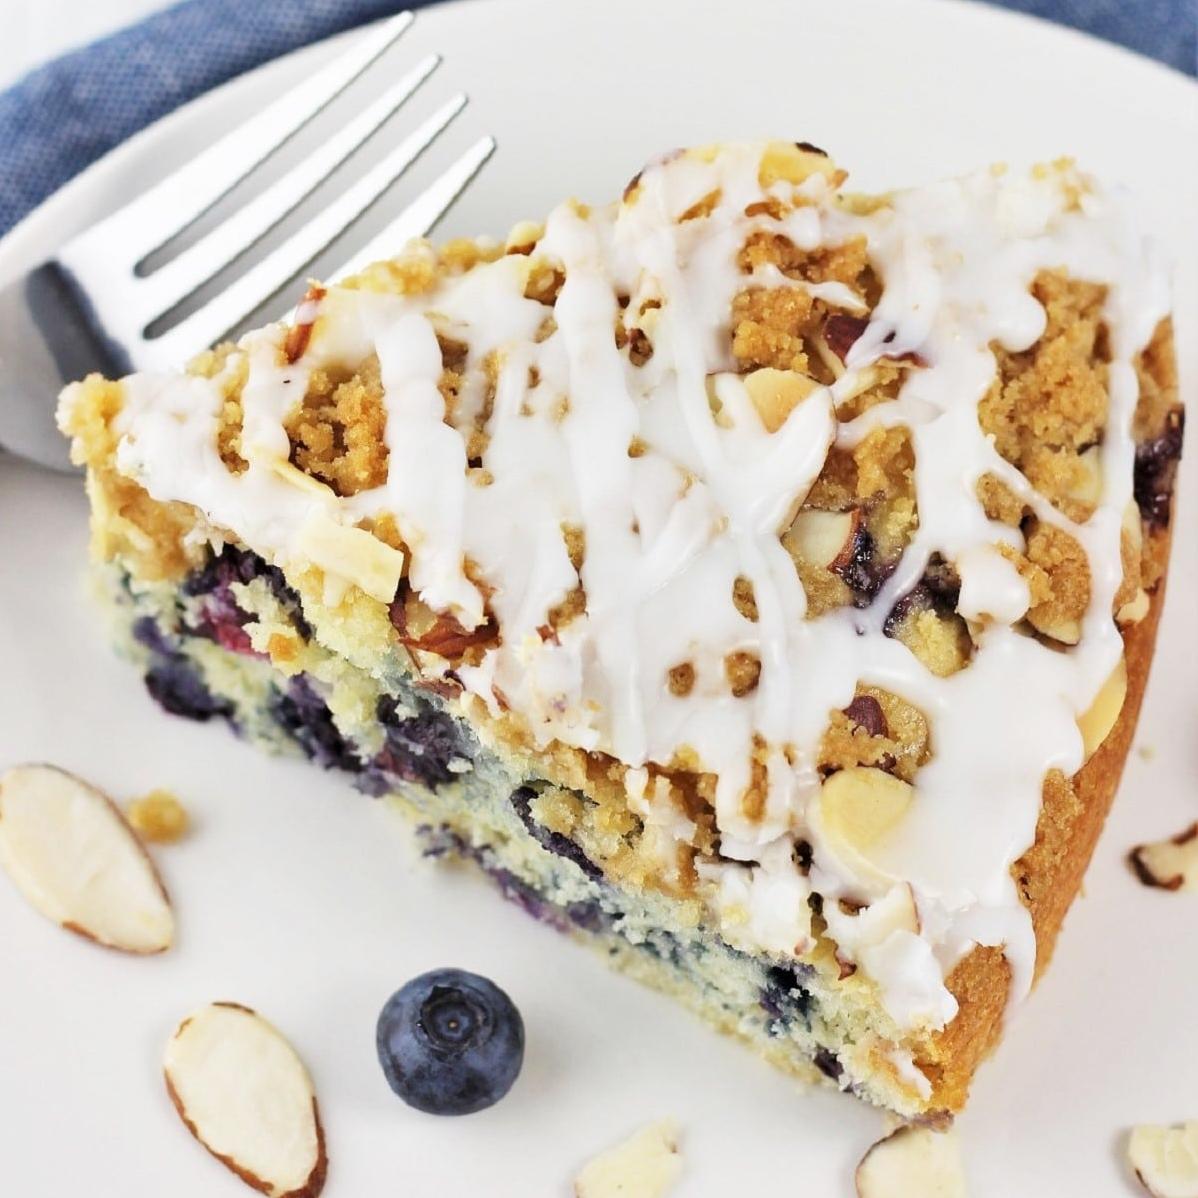  Bet you never thought blueberries and almonds could be this delicious together.